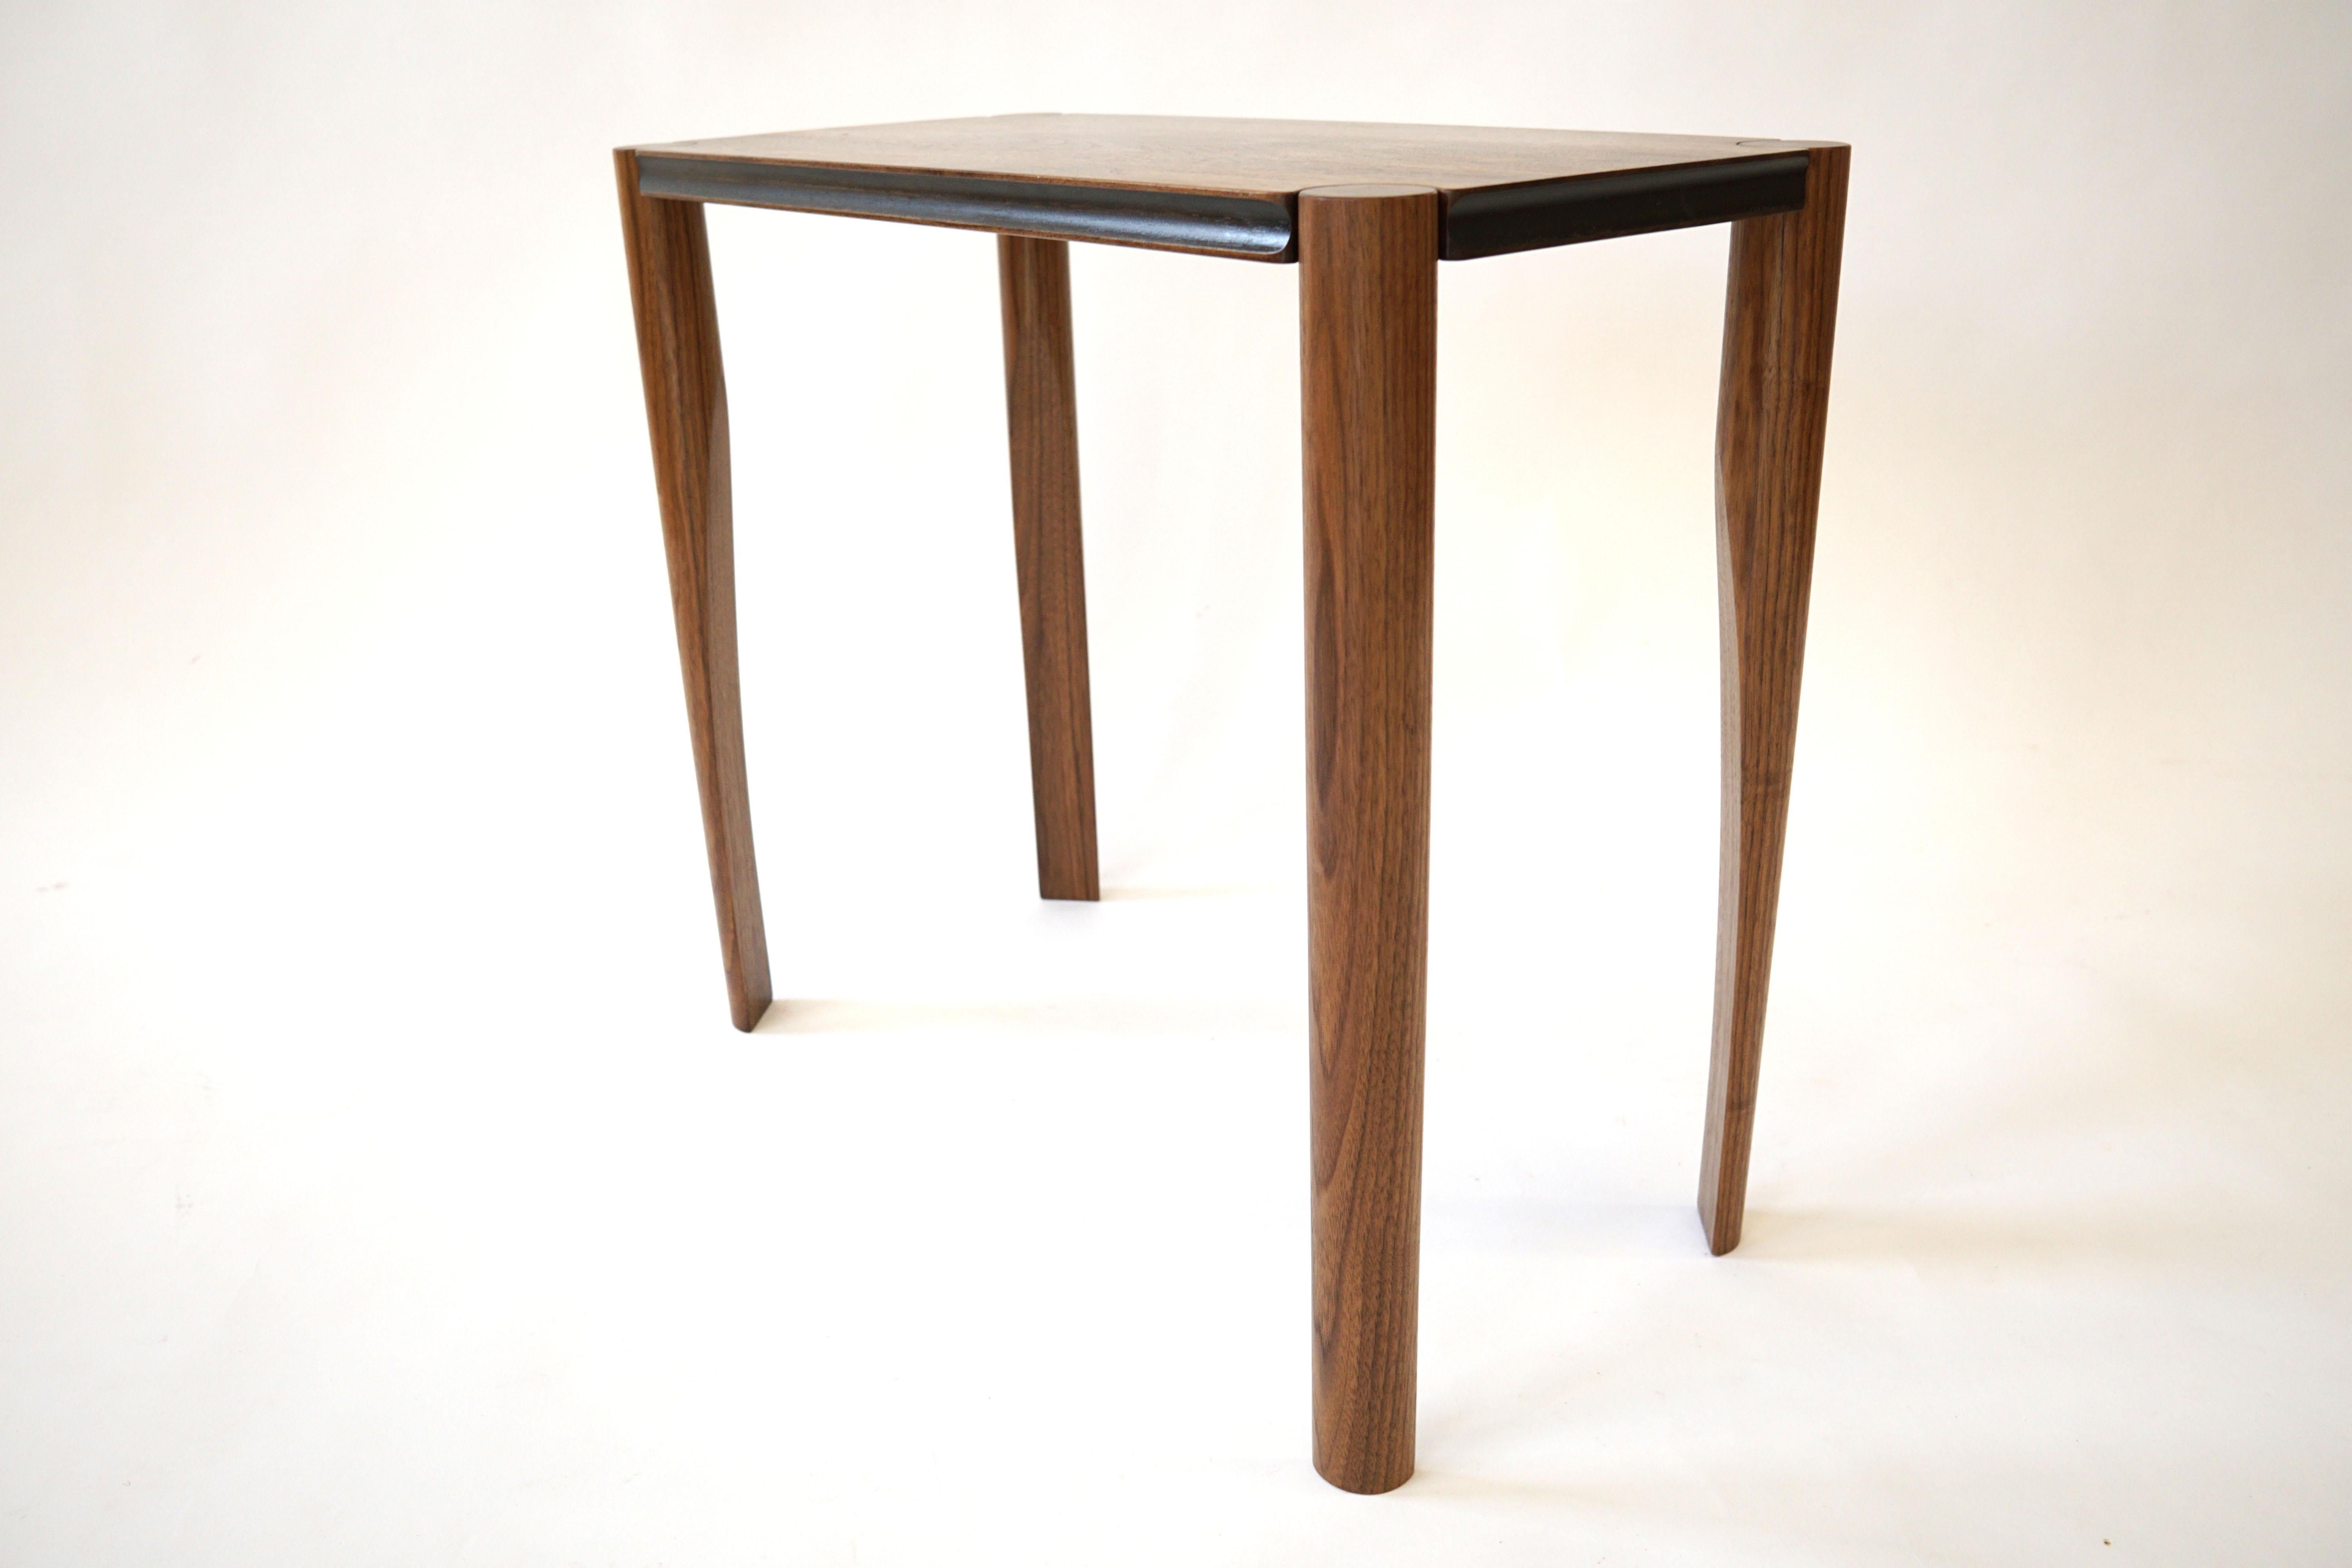 The Aviateur side table; simple, direct, more than meets the eye. It’s all in the details. Proportionally solid, poised to take flight. Made from solid hardwoods.

The top is always hand selected hardwoods. The carved legs give a sense of movement